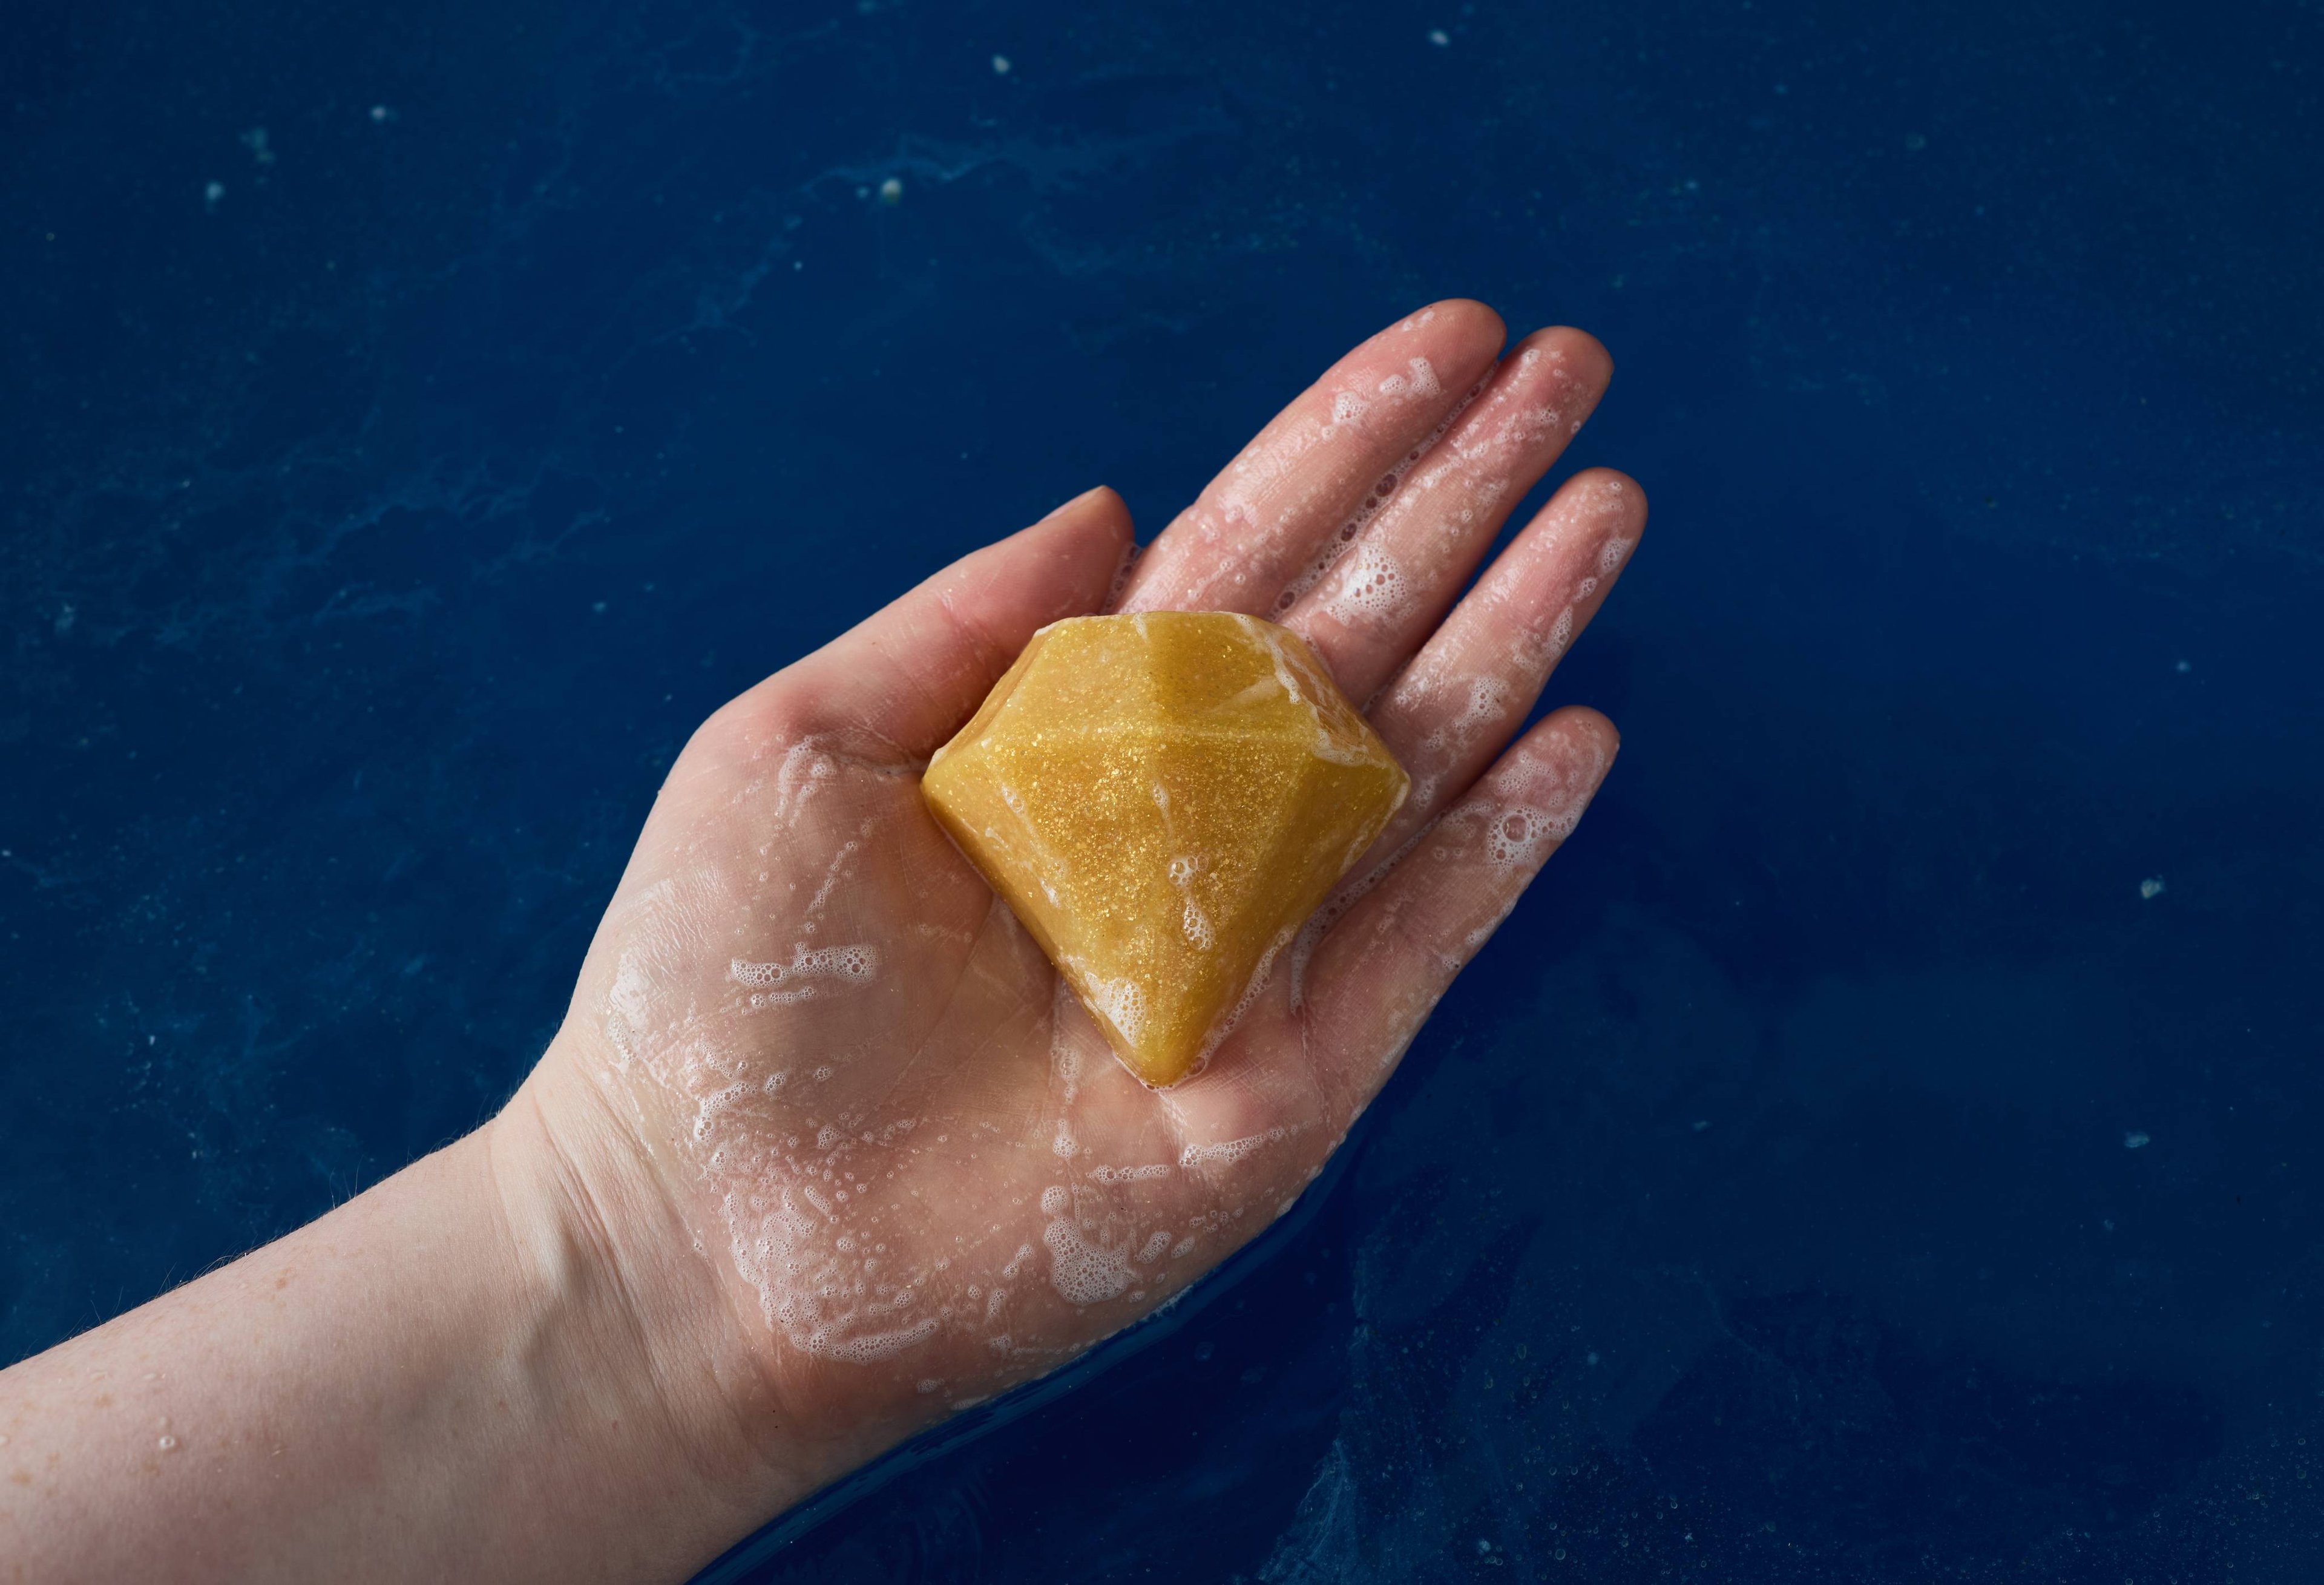 The image shows a close-up of the model's hand above deep, blue waters holding a shimmering, golden, diamond-shaped soap. 